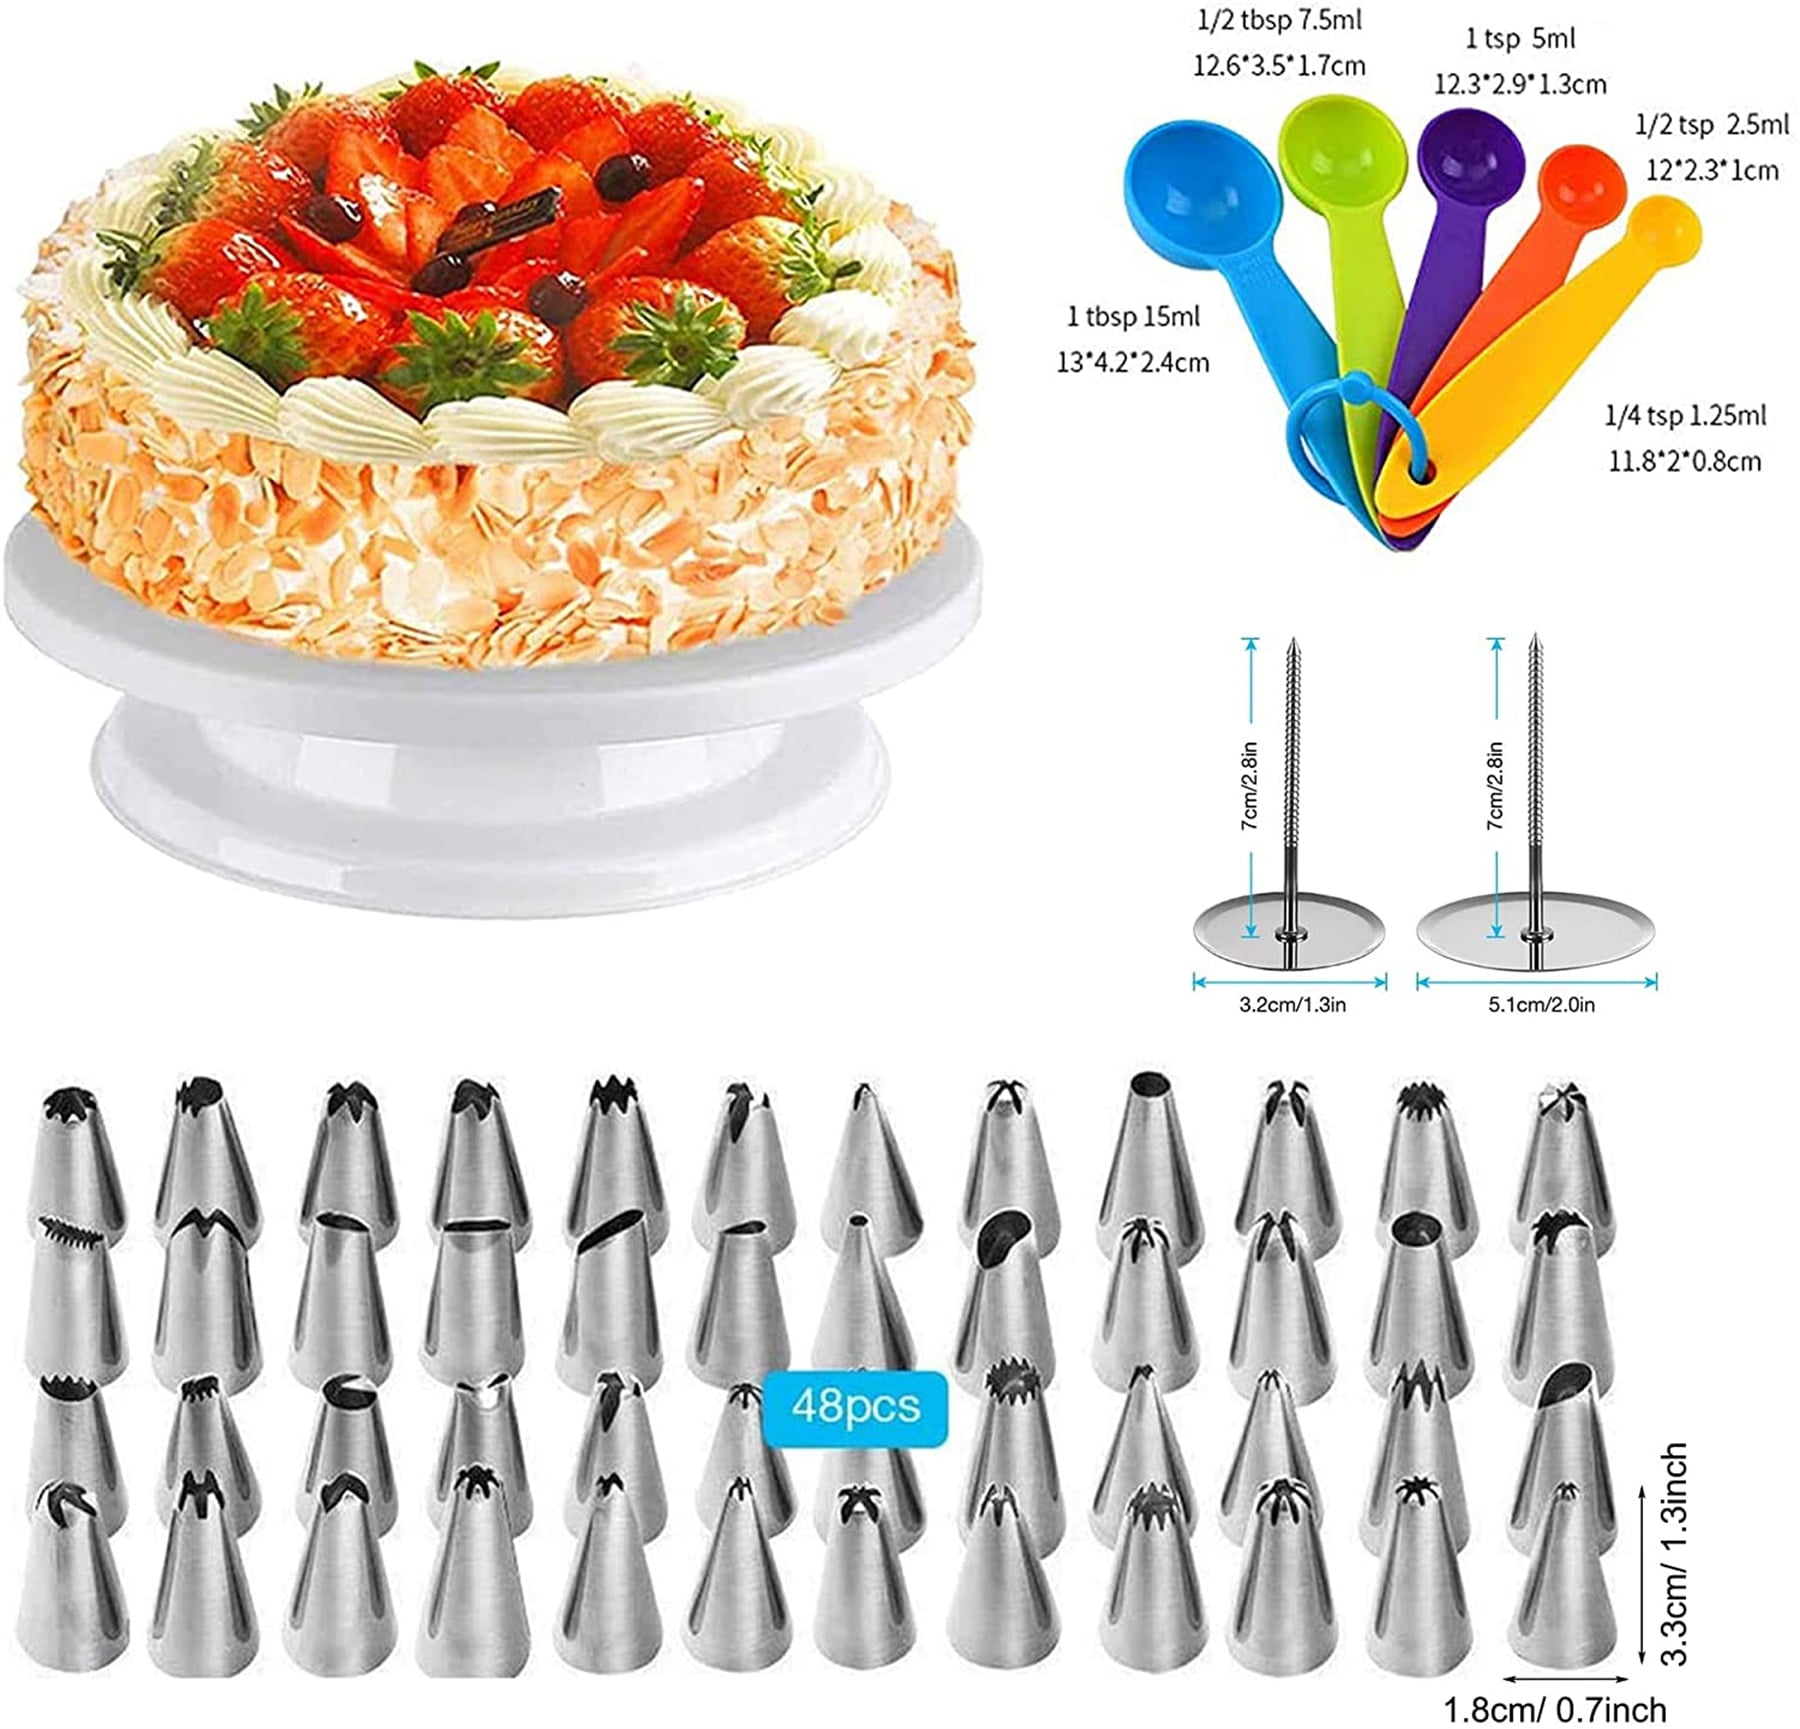 Lotfancy Cake Decorating Kit, 469Pc, Baking Supplies with Rotating Turntable, Springform Pans, Piping Bags and Tips Set, Icing Spatula, Smoother, Leve